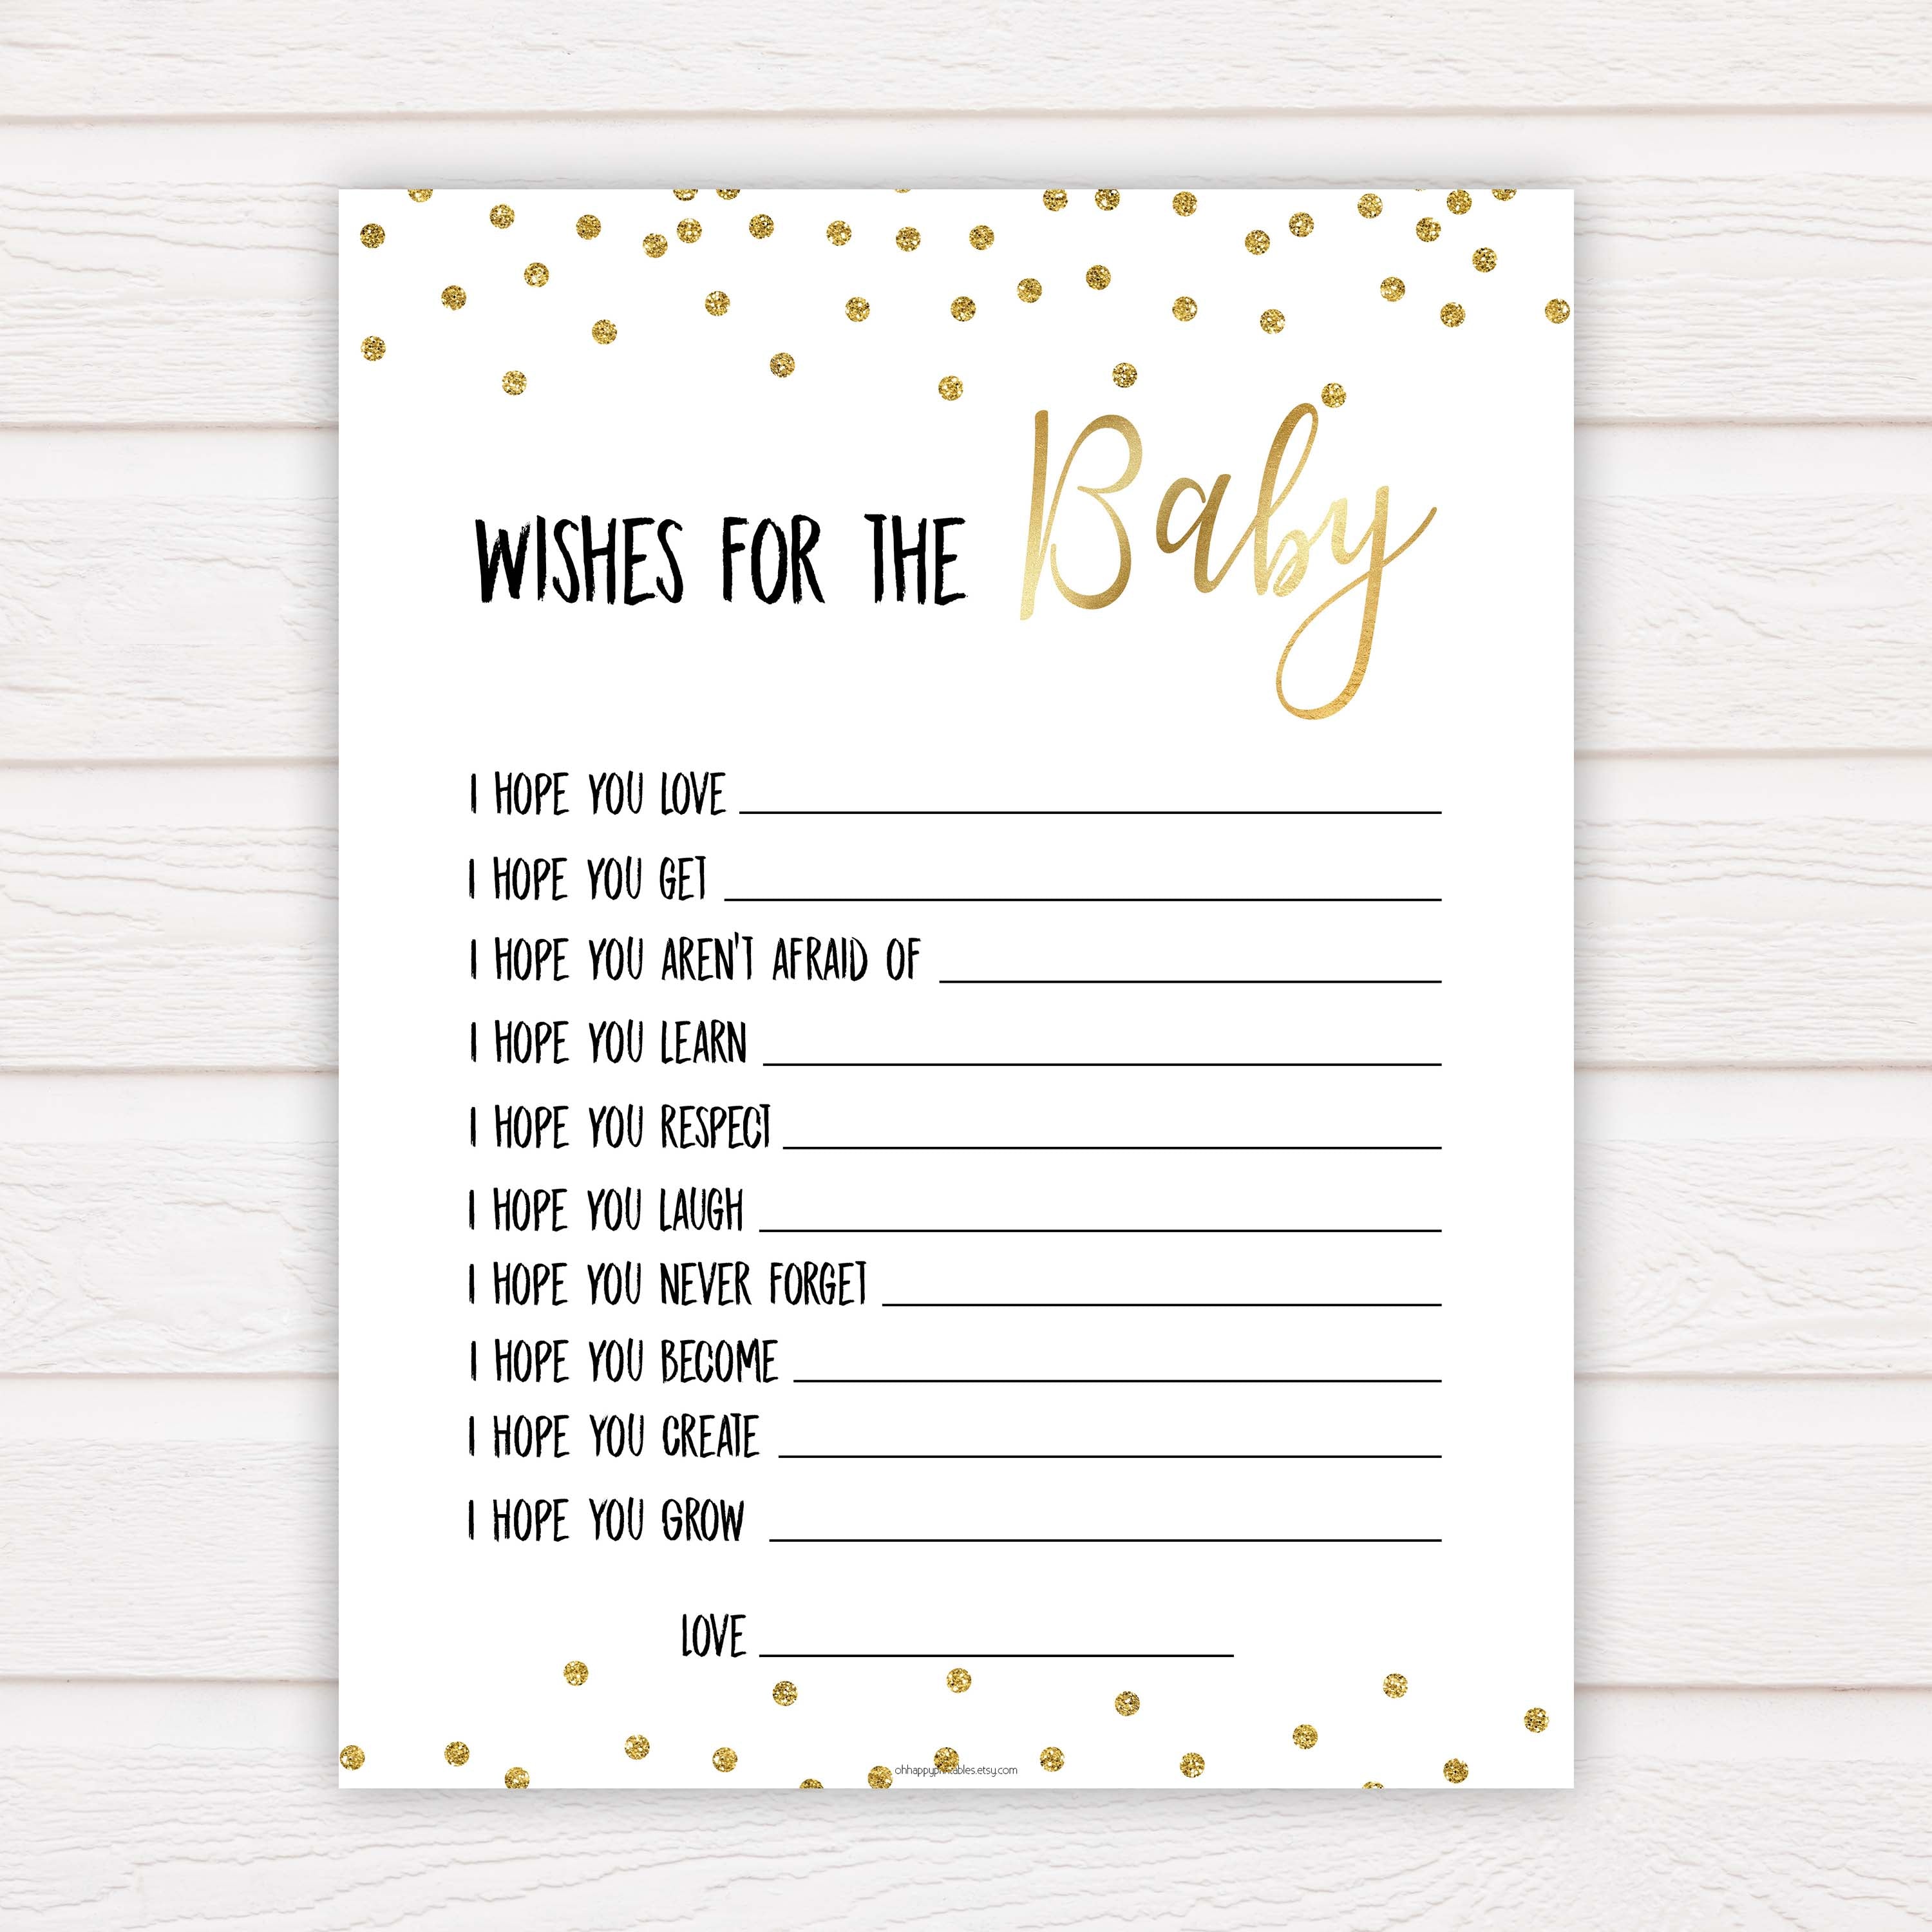 Gold Glitter Wishes For The Baby, Baby Wishes, Wishes for The Baby, Gold Baby Shower, Baby Shower Baby Wishes, Gold Baby Wishes Cards